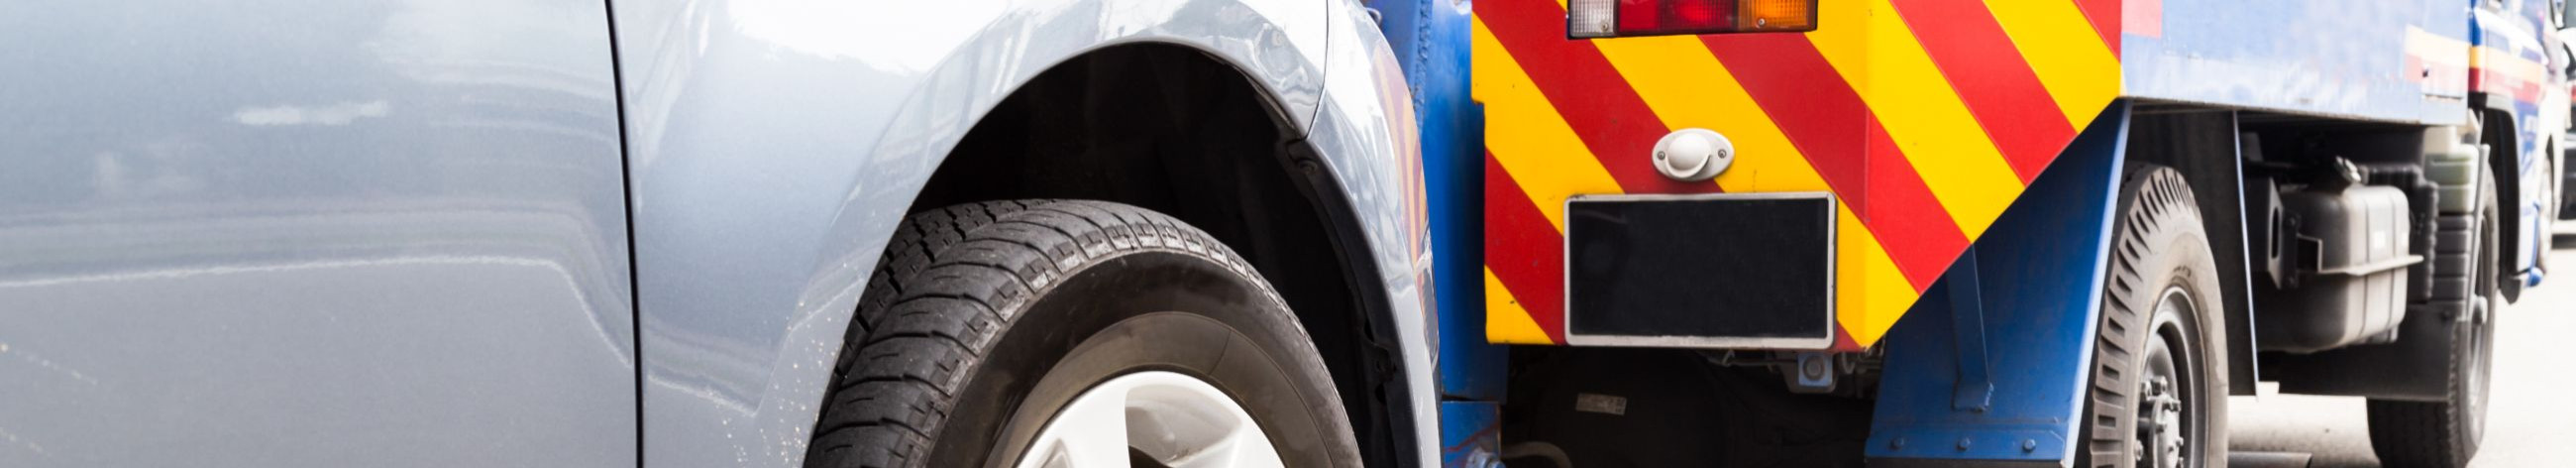 roadside assistance, towage services, Tug-of-war, car assistance 24/7h, VINCING SERVICES, Car assistance services, Extraction and winching, pumping of tyres, extraction, winching